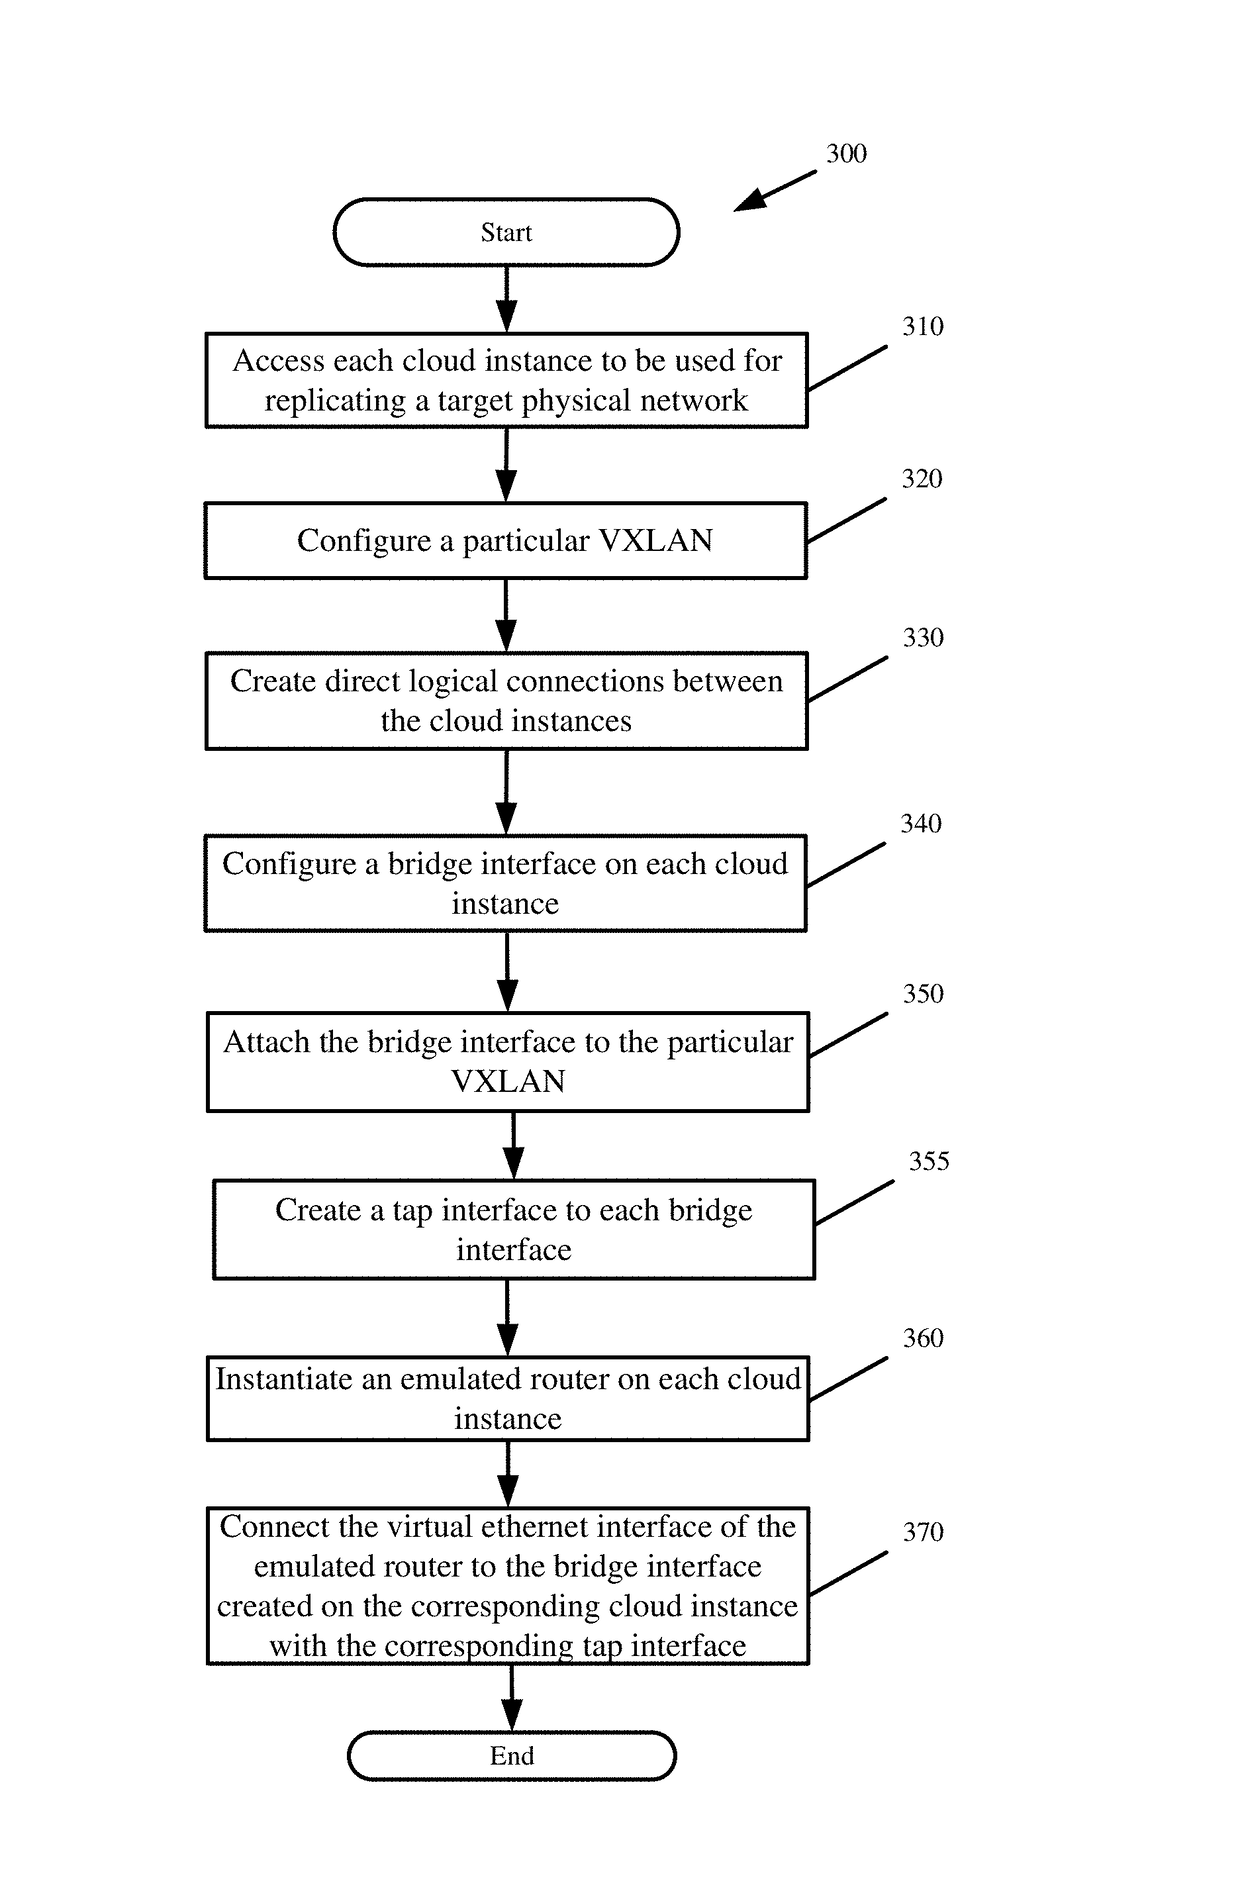 Holistic validation of a network via native communications across a mirrored emulation of the network